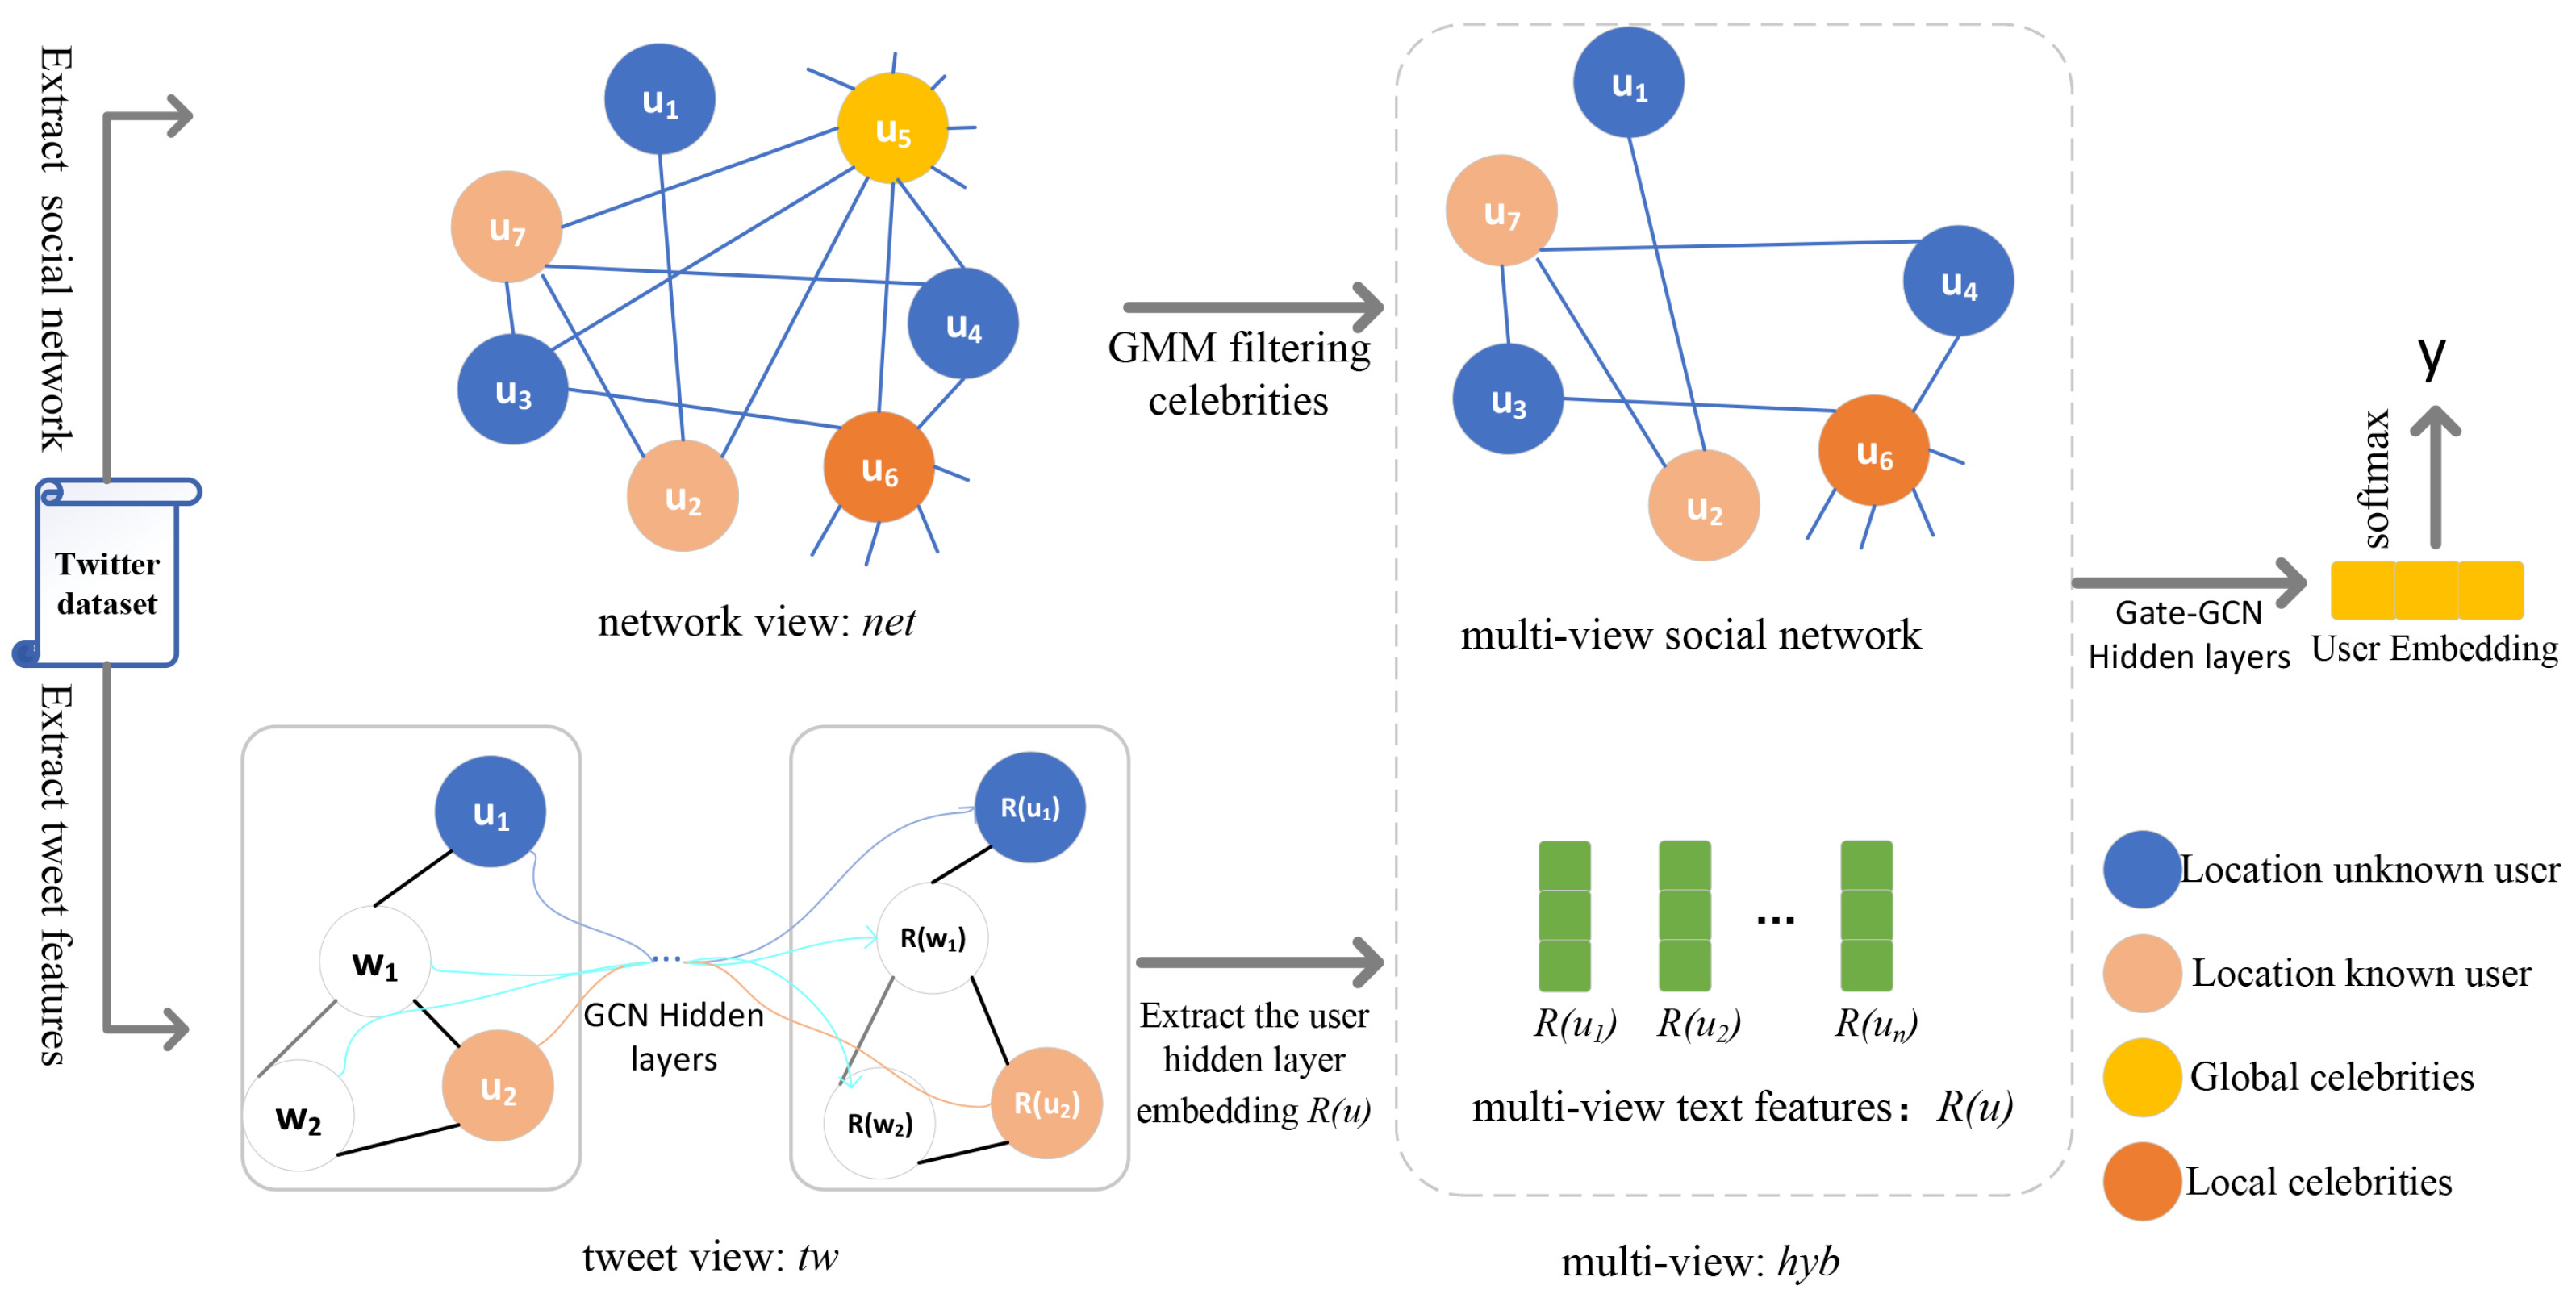 The Impact of Social Networking on Human Interactions - smartData